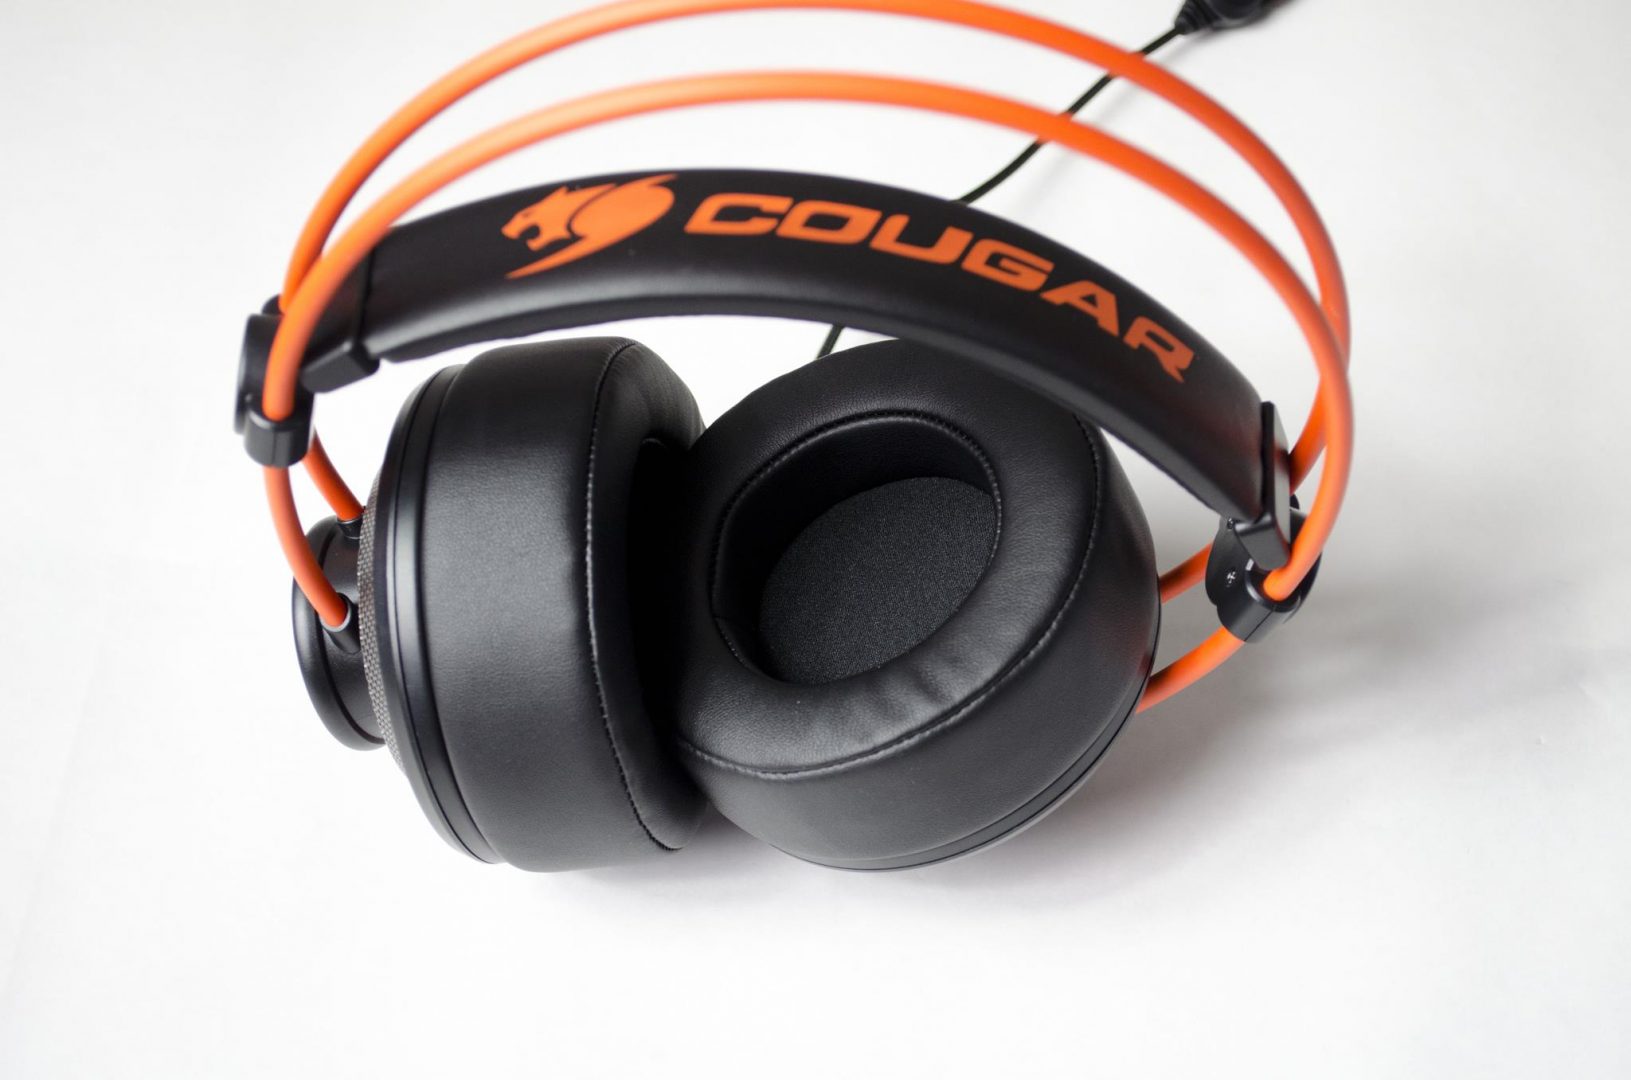 cougar immera headset review_5